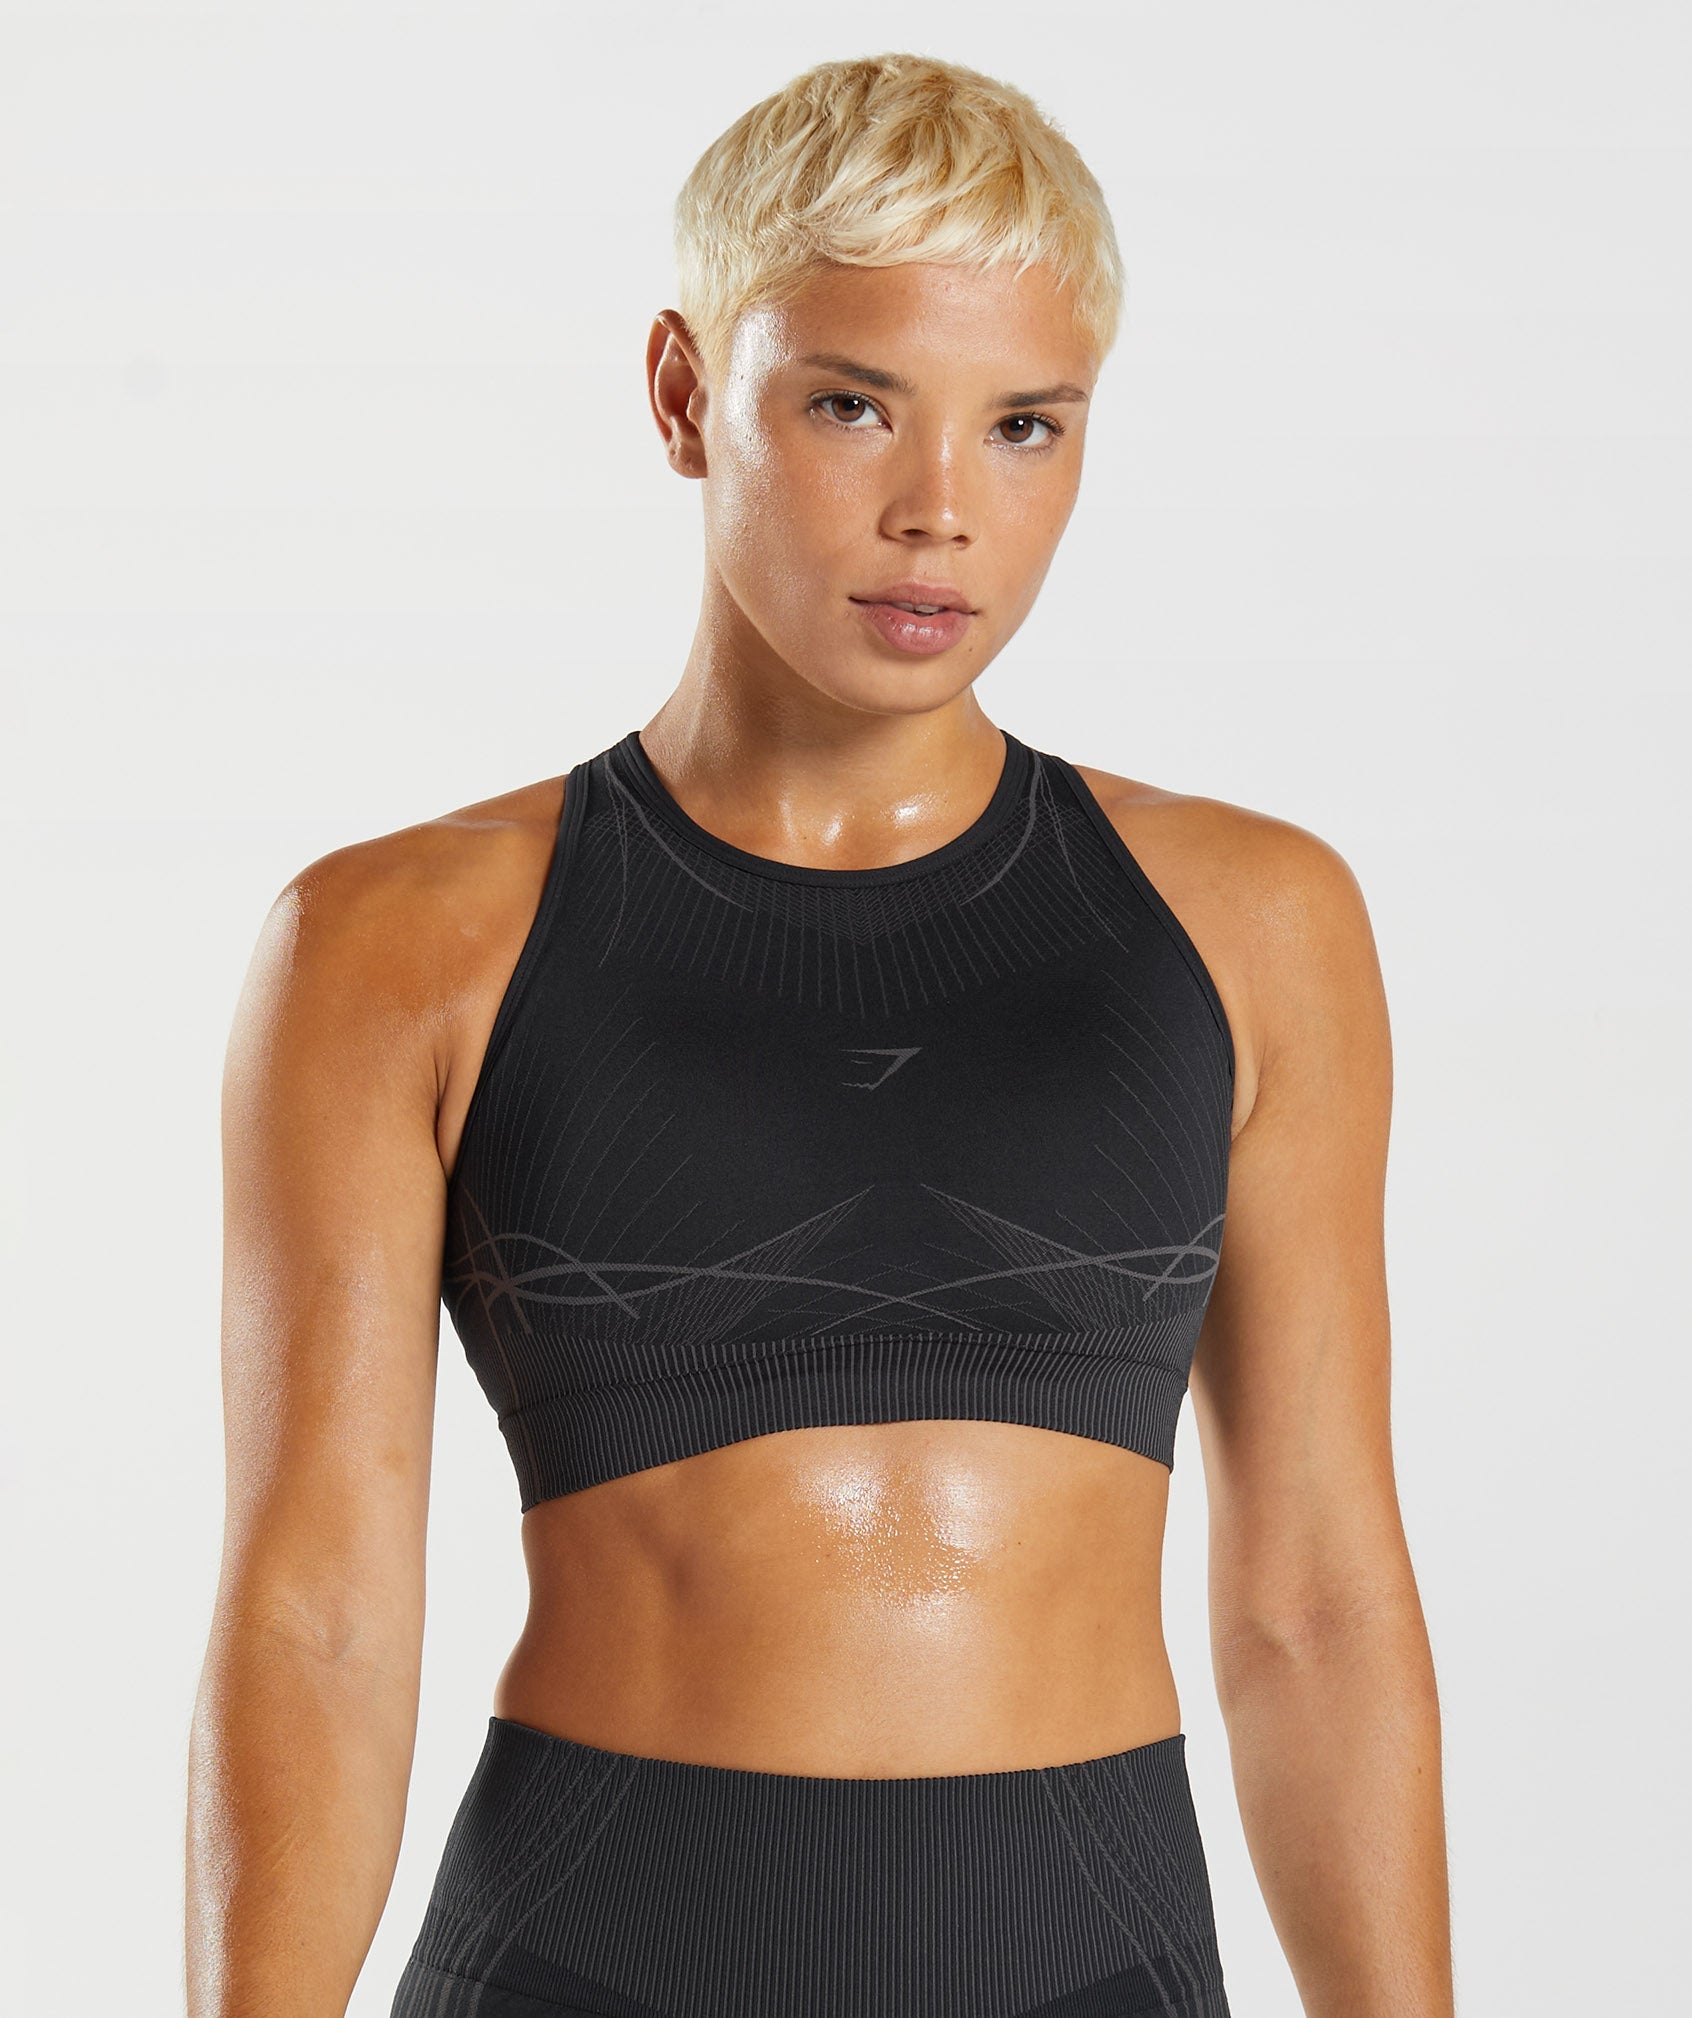 Gymshark Ruched Sports Bra - Paige Pink